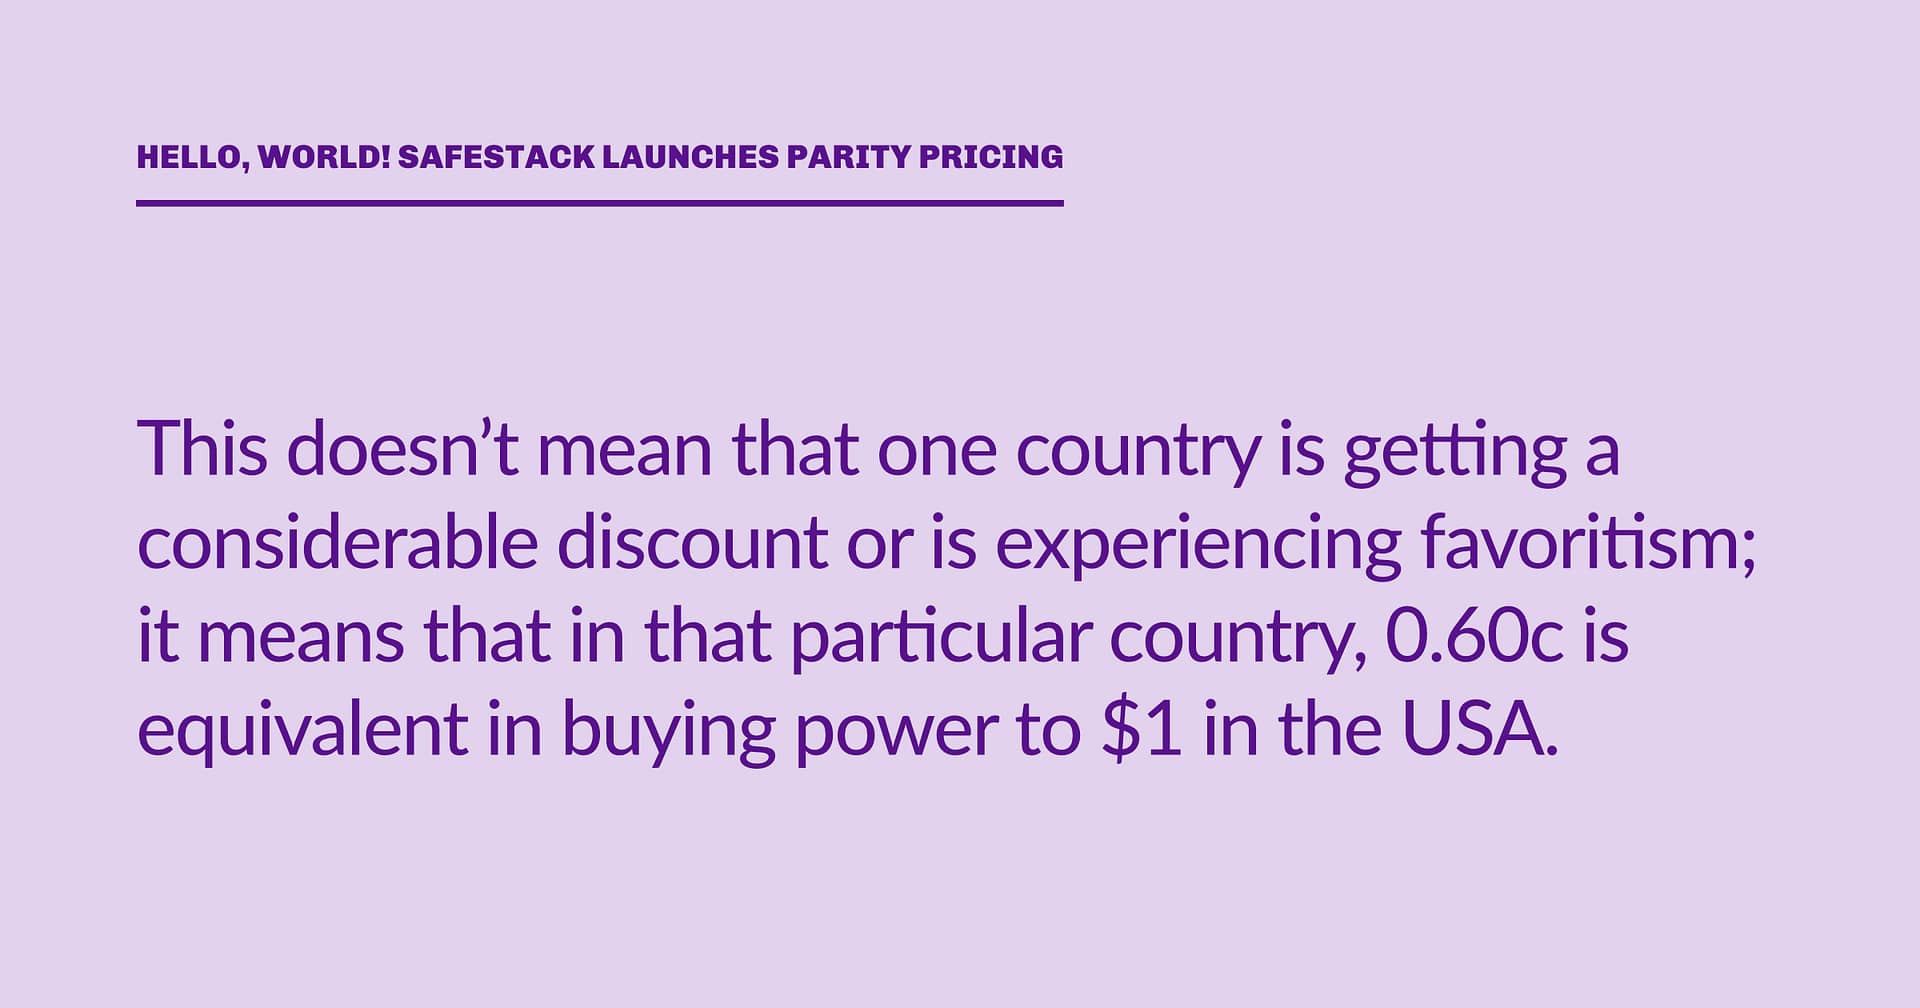 Highlight block: "This doesn't mean that one country is getting a considerable discount or is experiencing favoritism; it means that in that particular country, 0.60c is equivalent in buying power to $1 in the USA."